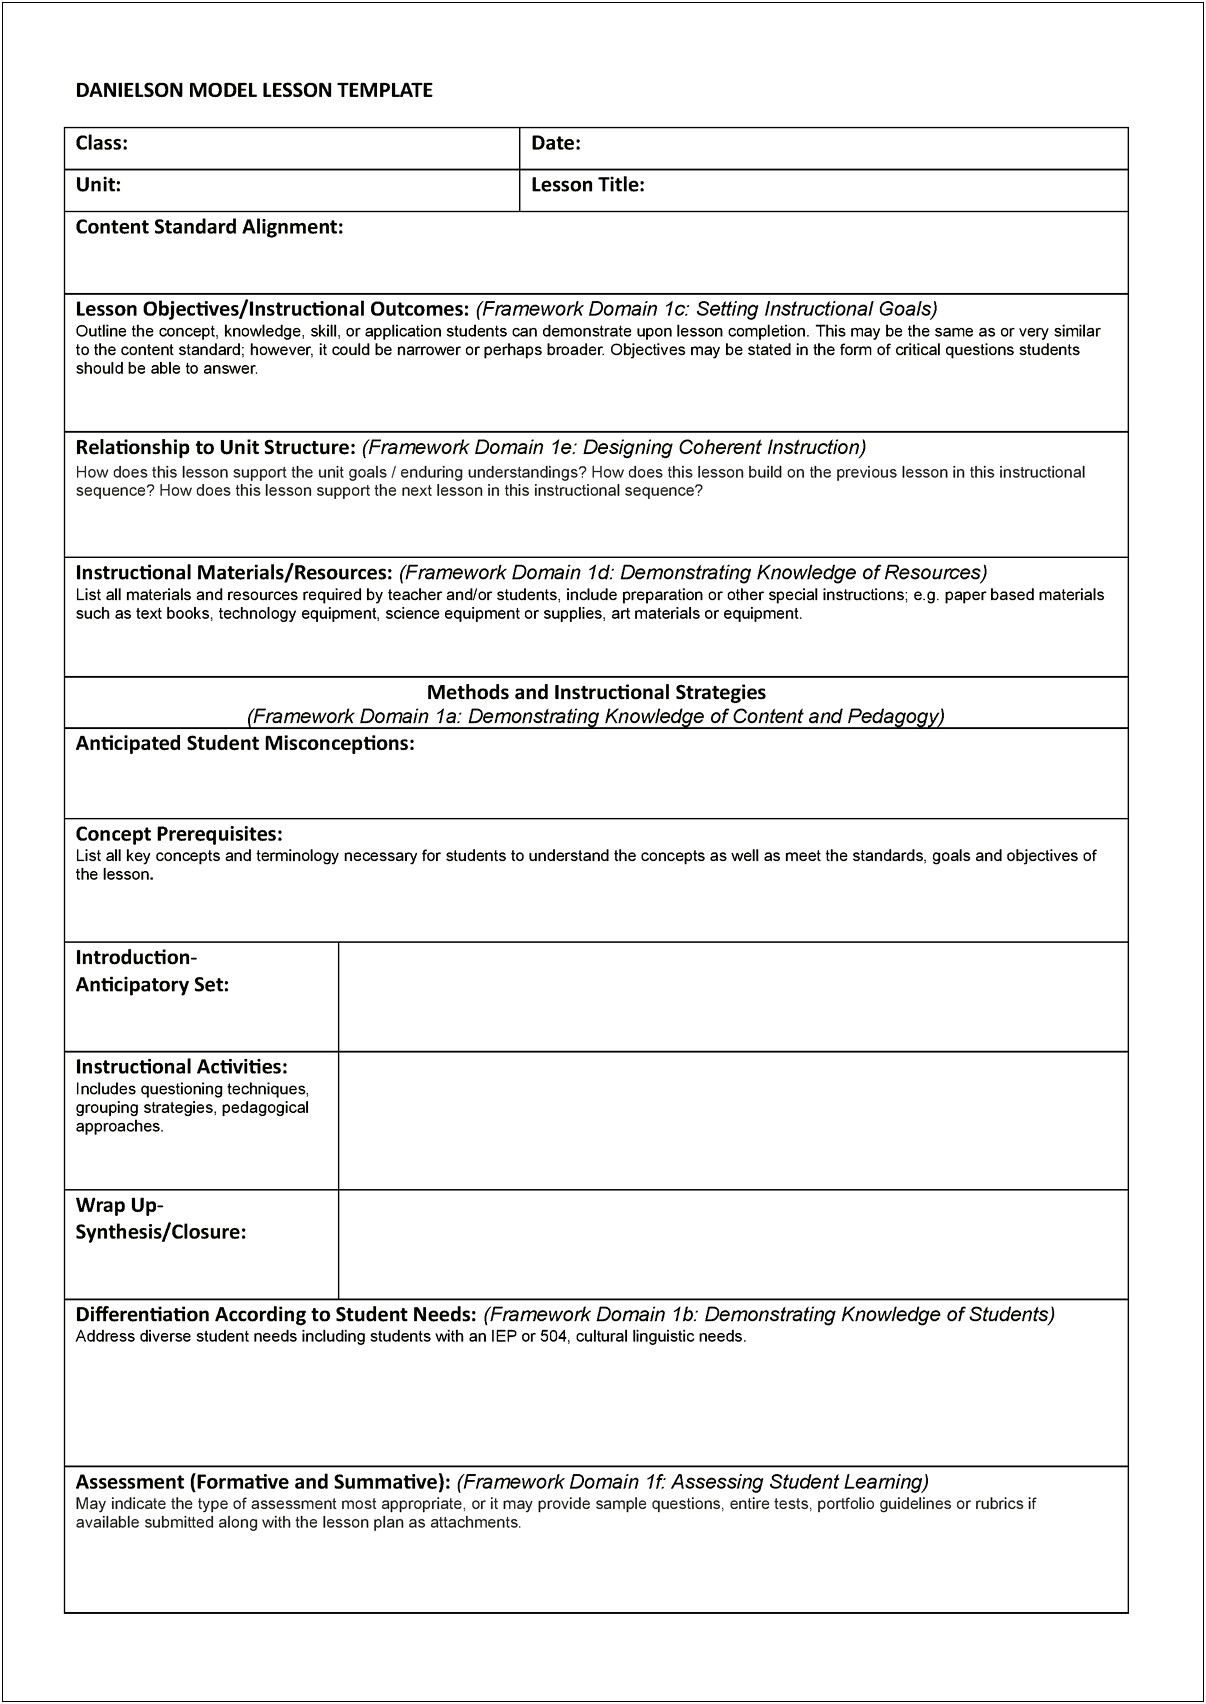 Easy Lesson Plan Template Free That Fits Danielson